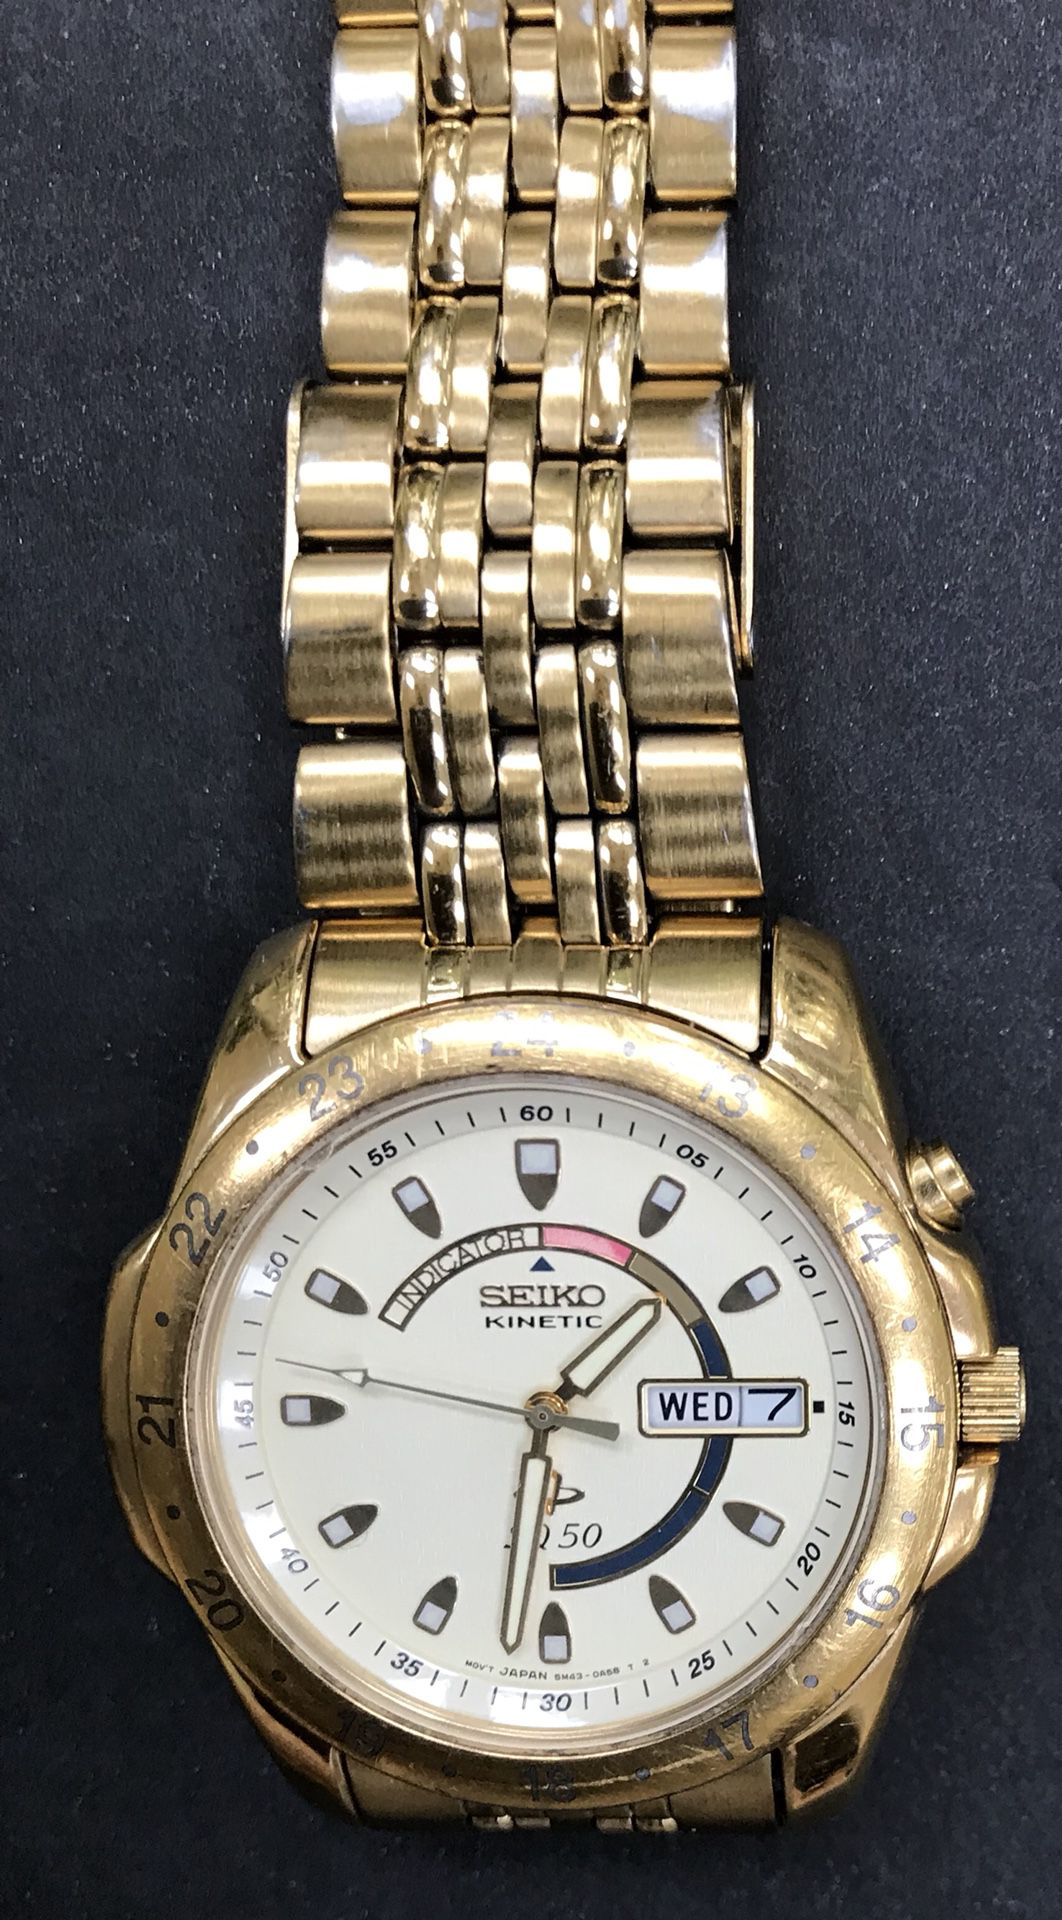 Men's SEIKO Kinetic Gold-tone Watch - 5M43-0A29 for Sale in Aiken, SC -  OfferUp